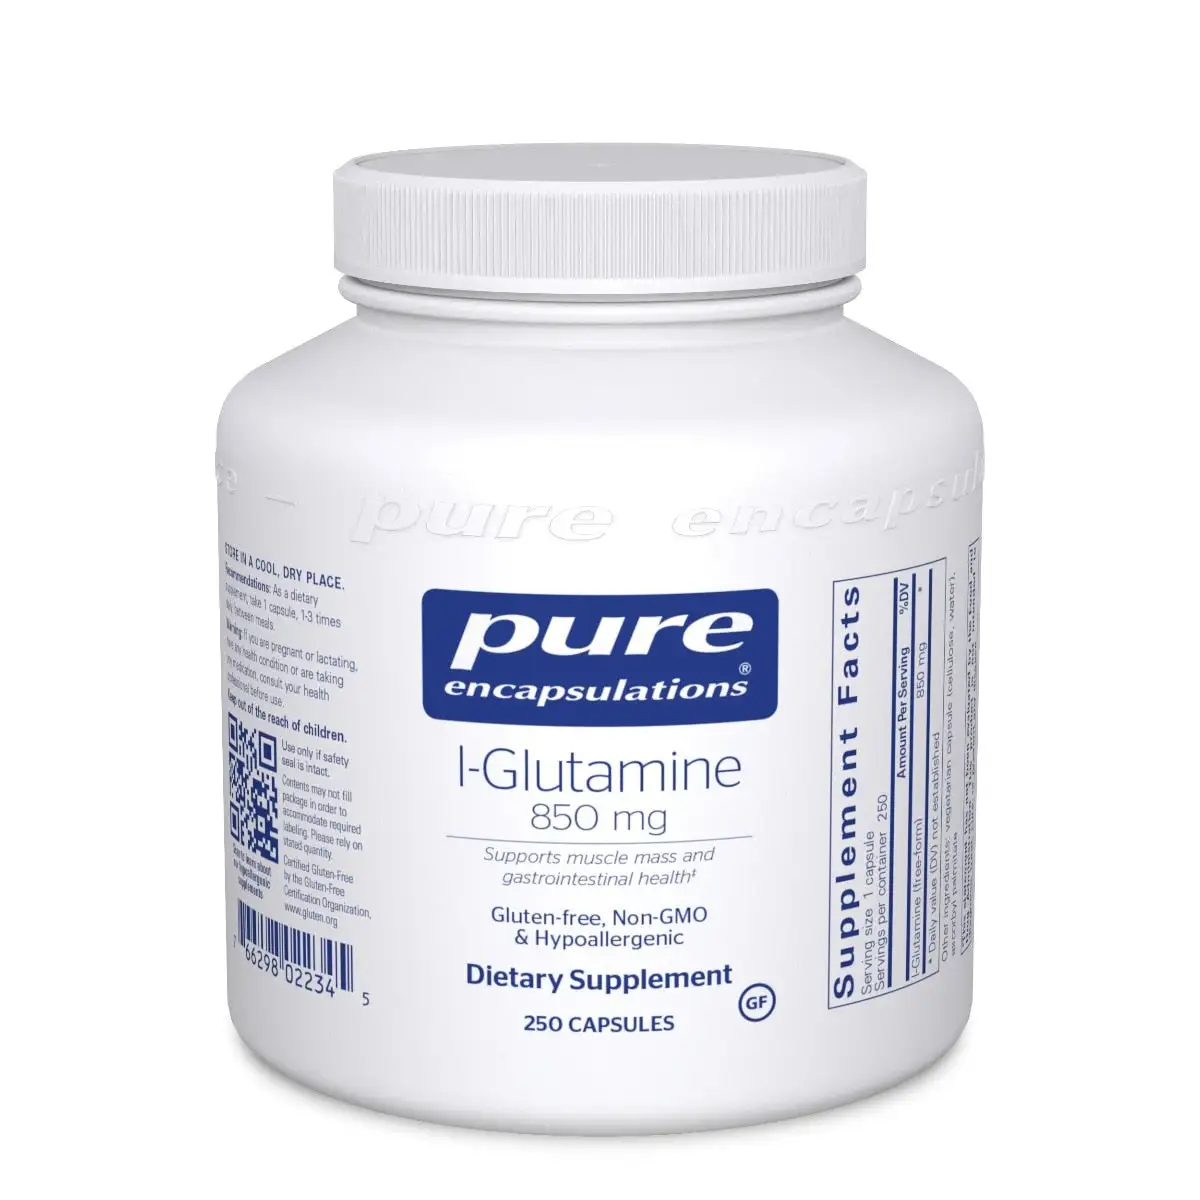 l Glutamine 850 Mg. (old price, combined with other products)